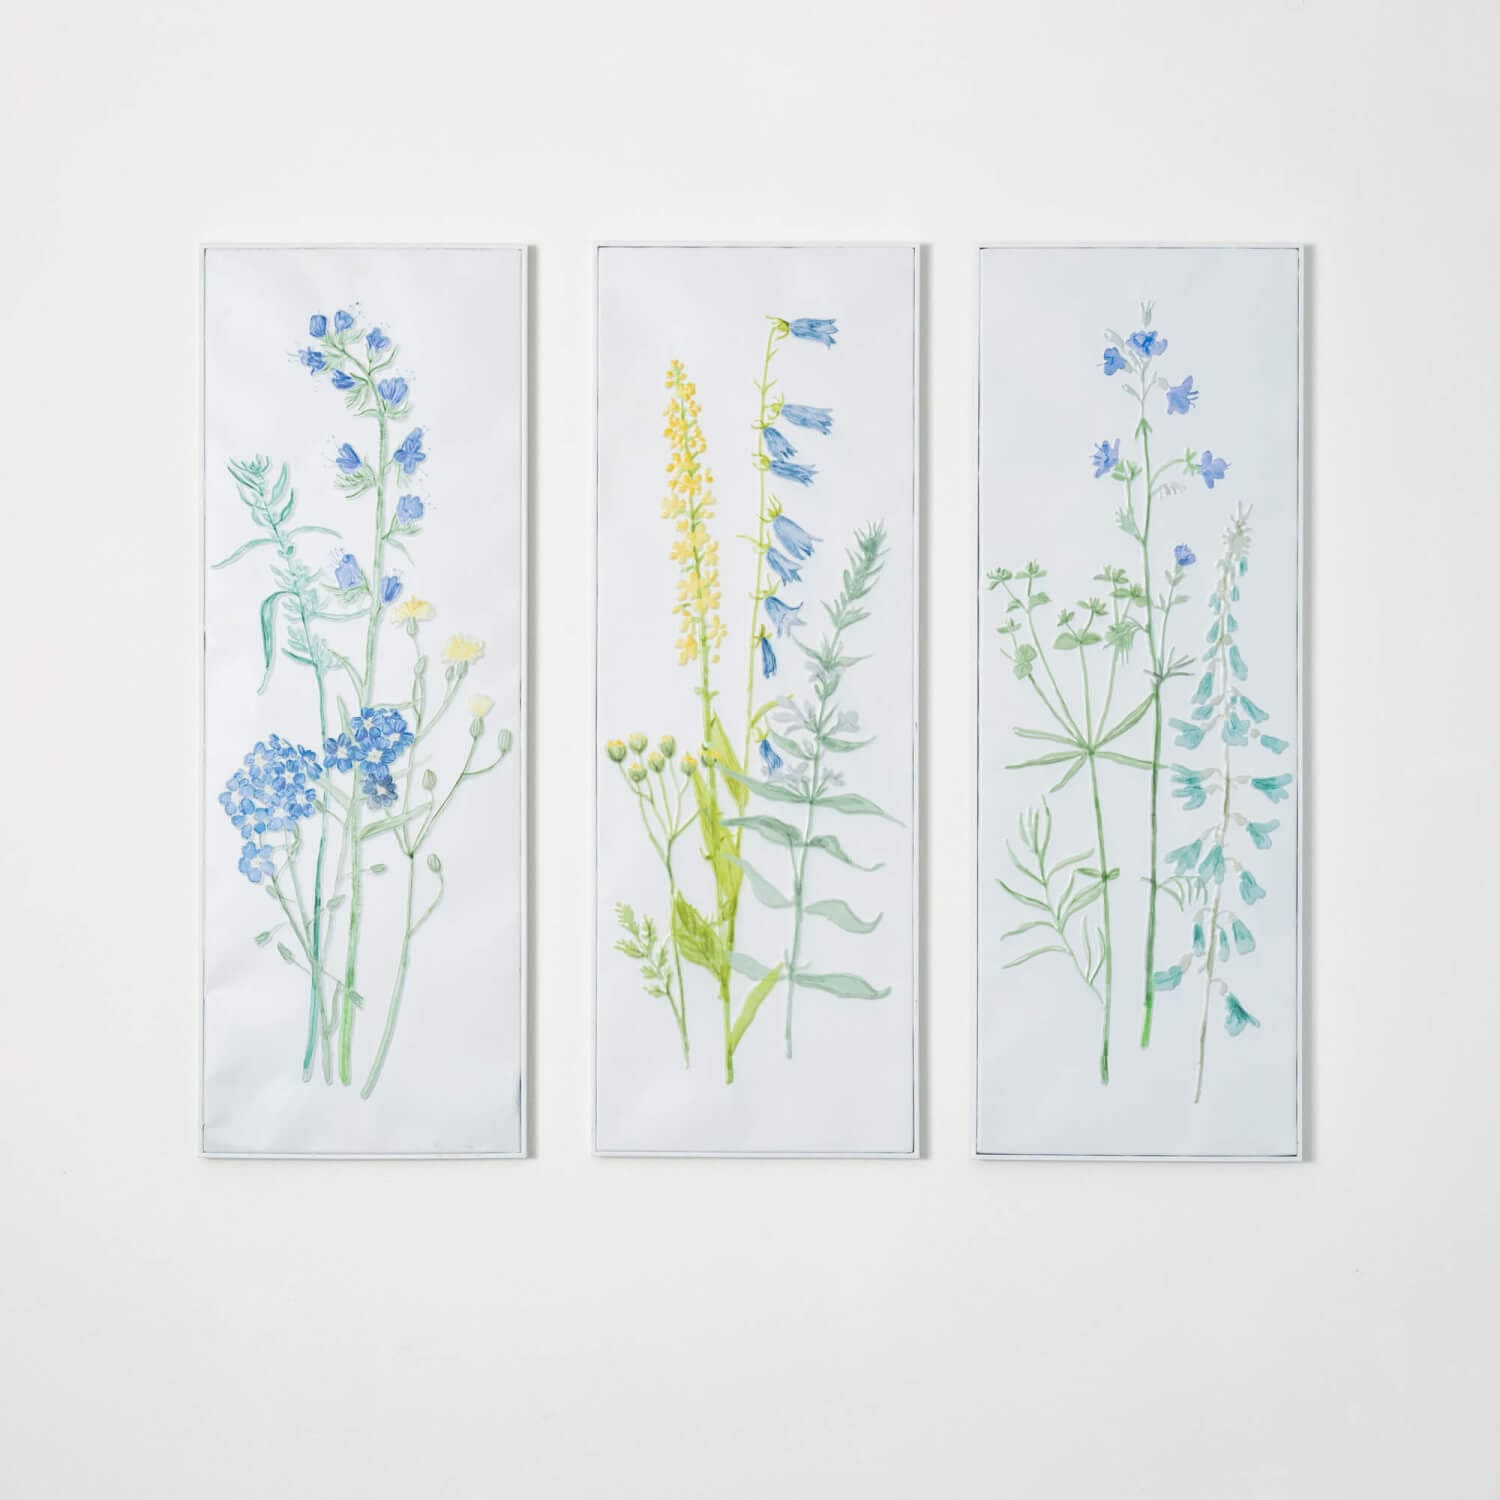 Herb Inspired Wall Art Panel Set Elevate Home Decor - Wall Decor